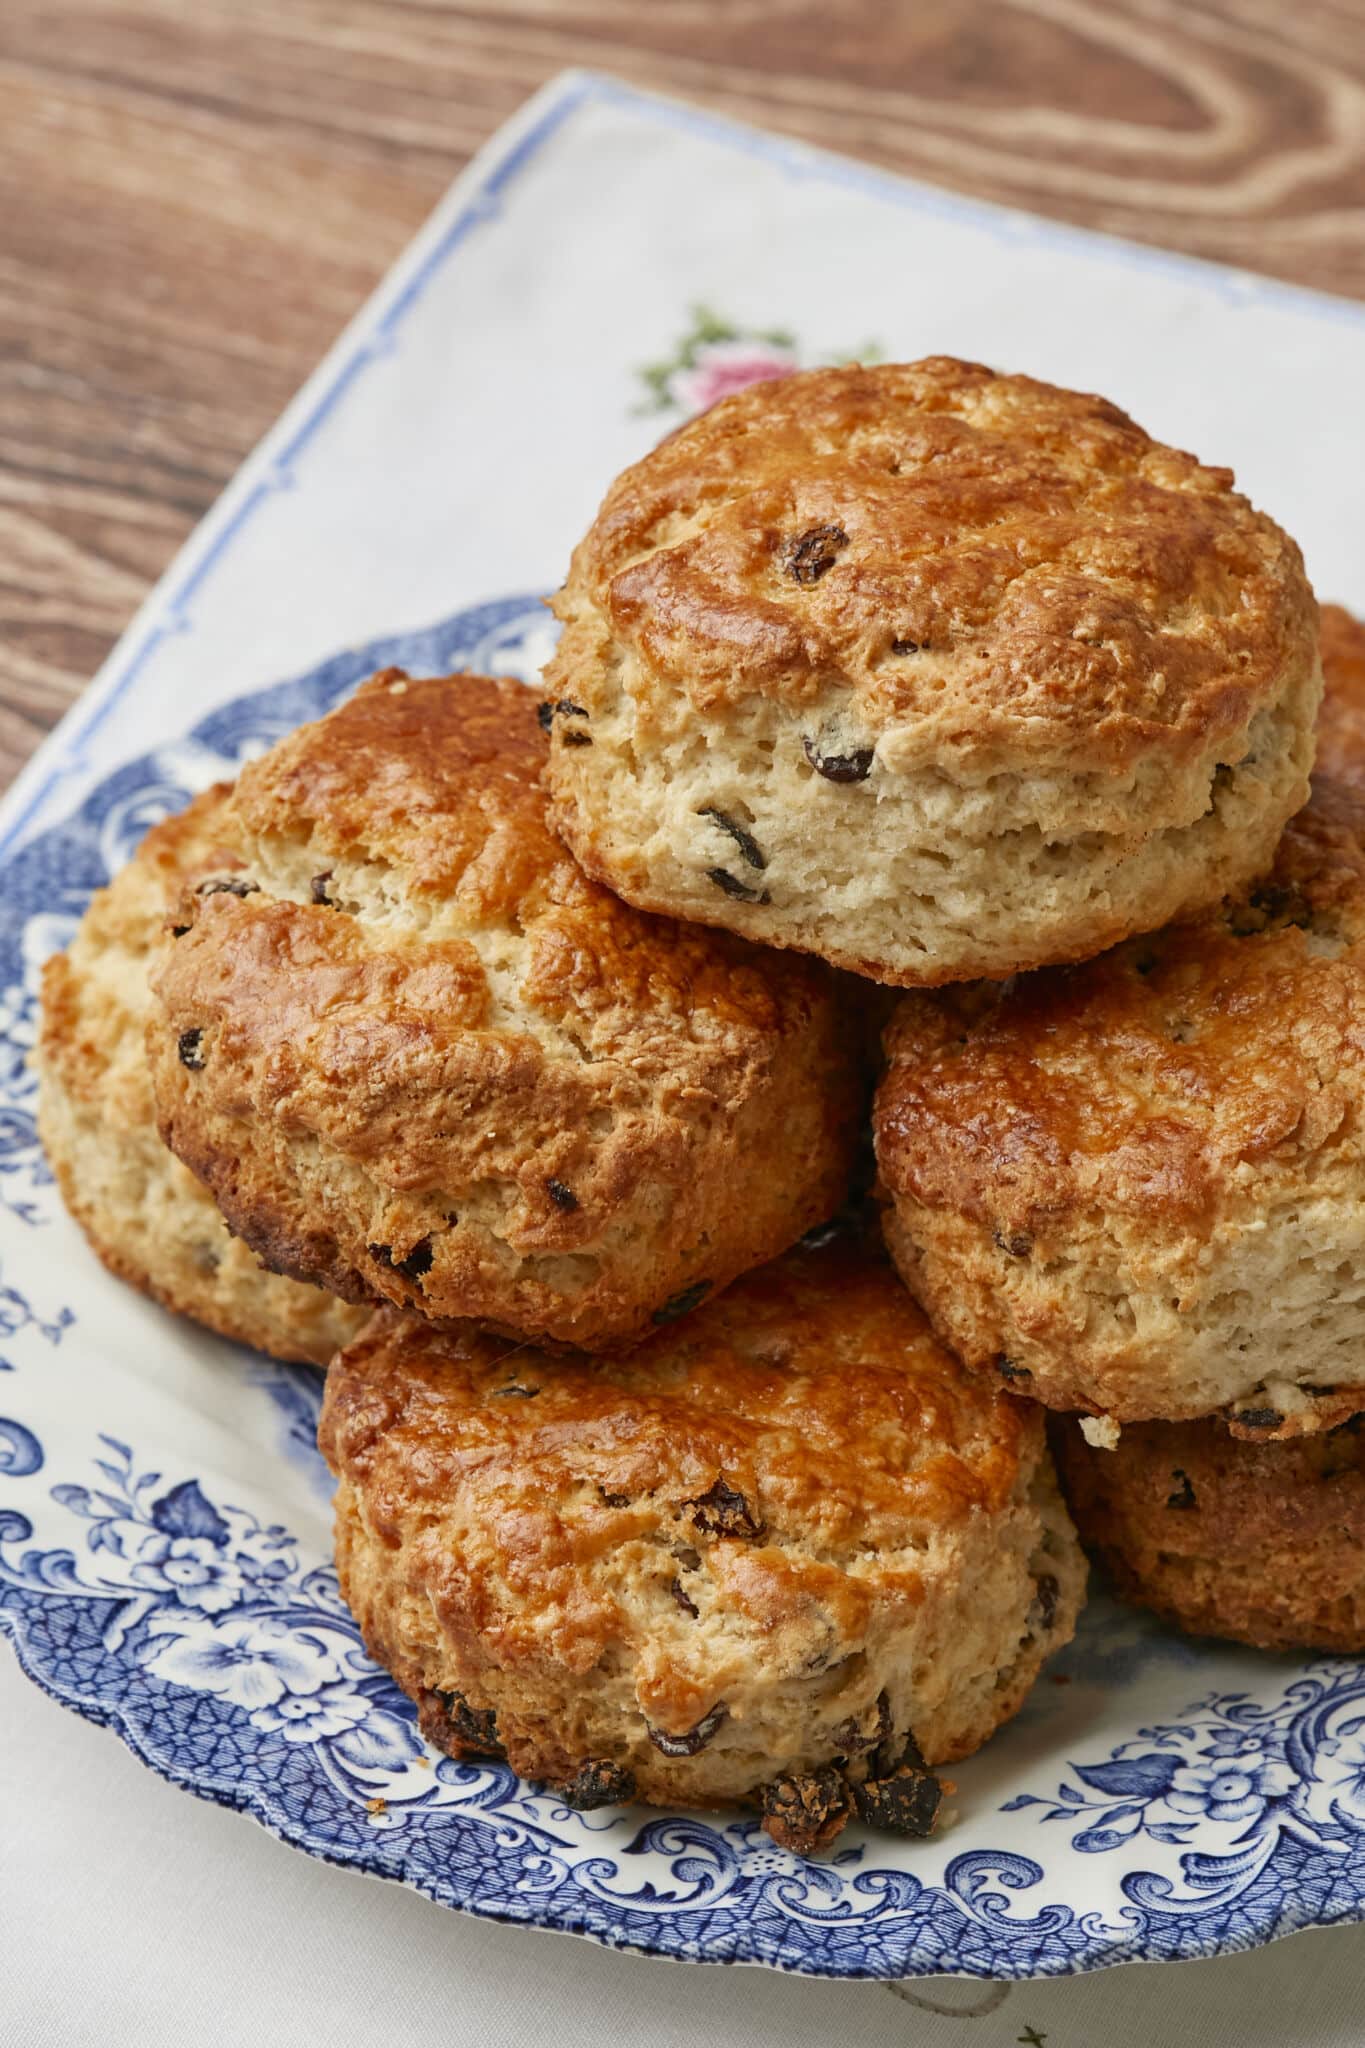 Gemma's Best Ever Irish Scones are served on a floral platter. They are golden brown with a crunchy, crackly exterior and loaded with raisins.